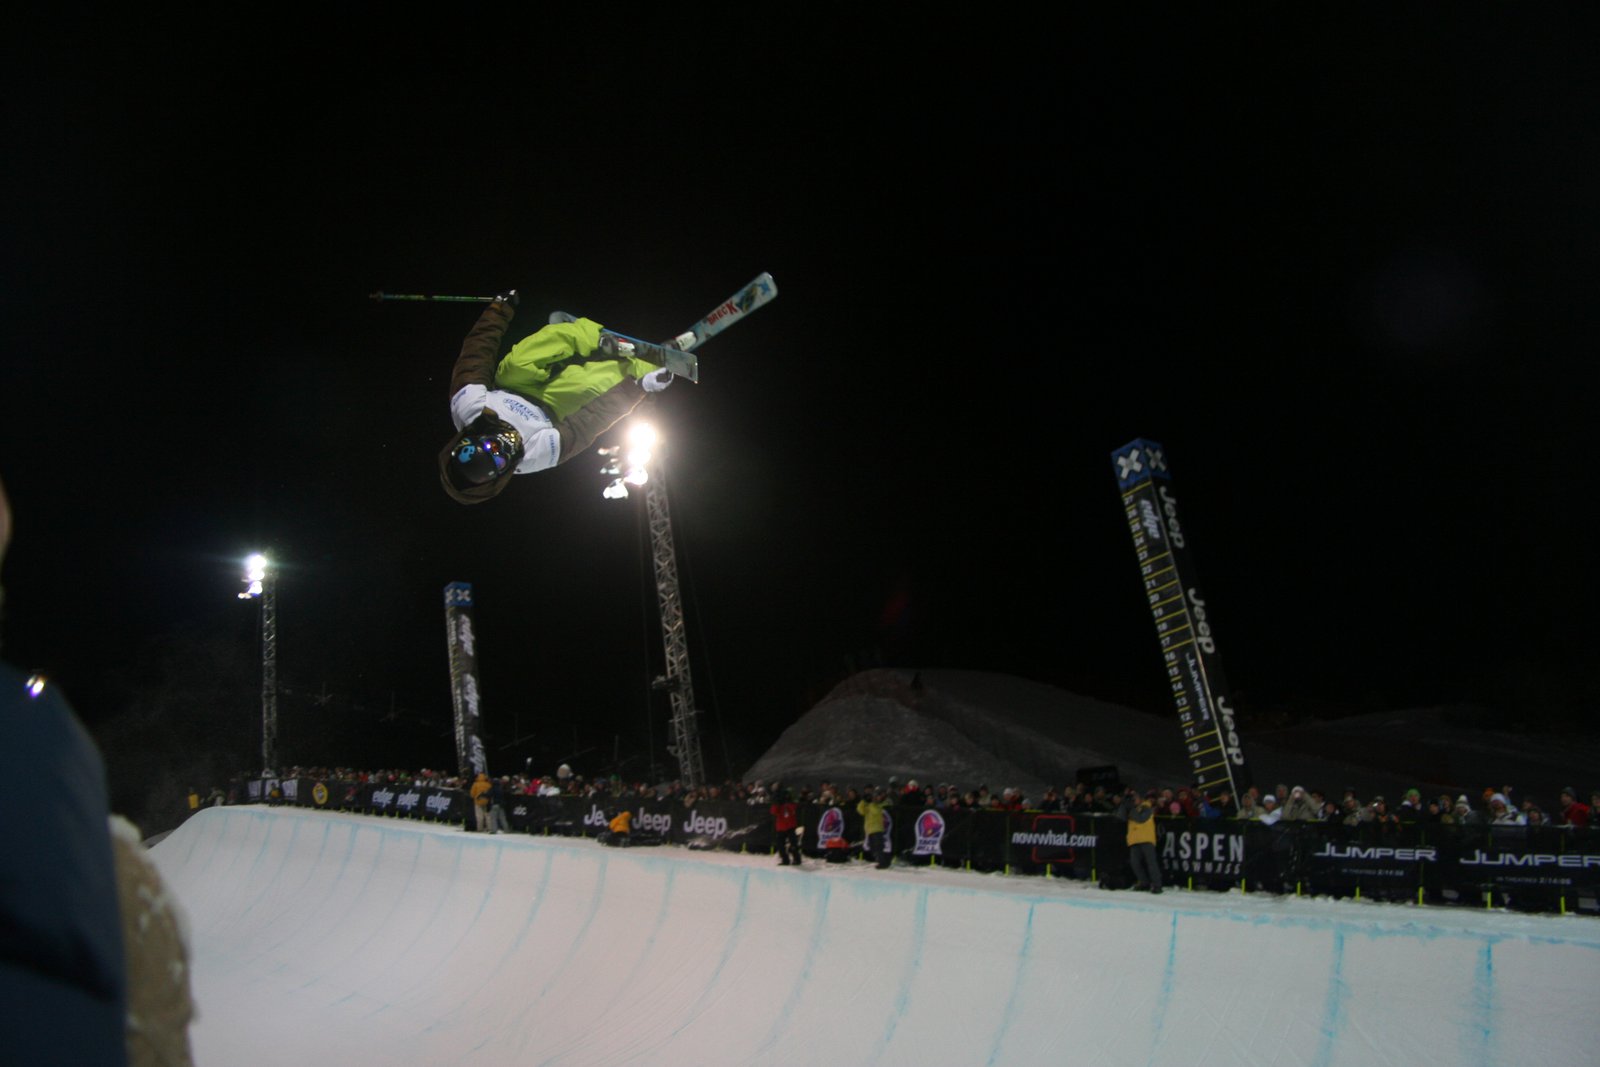 Colby west 08 x-games pipe finals